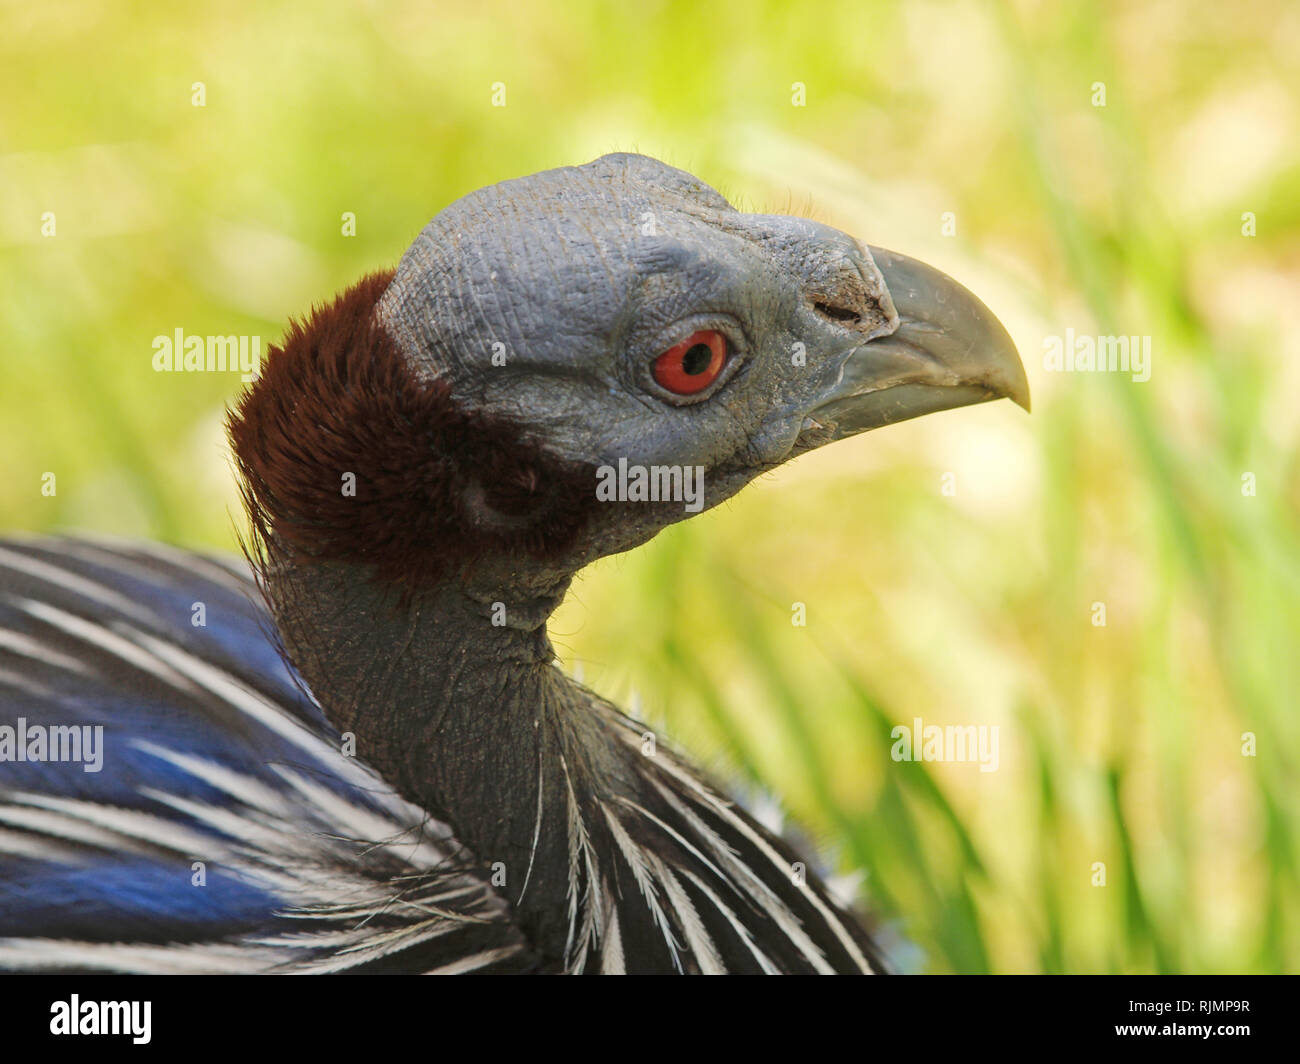 Portrait of vulturine gineafowl classified as least concern on IUCN RED LIST Stock Photo